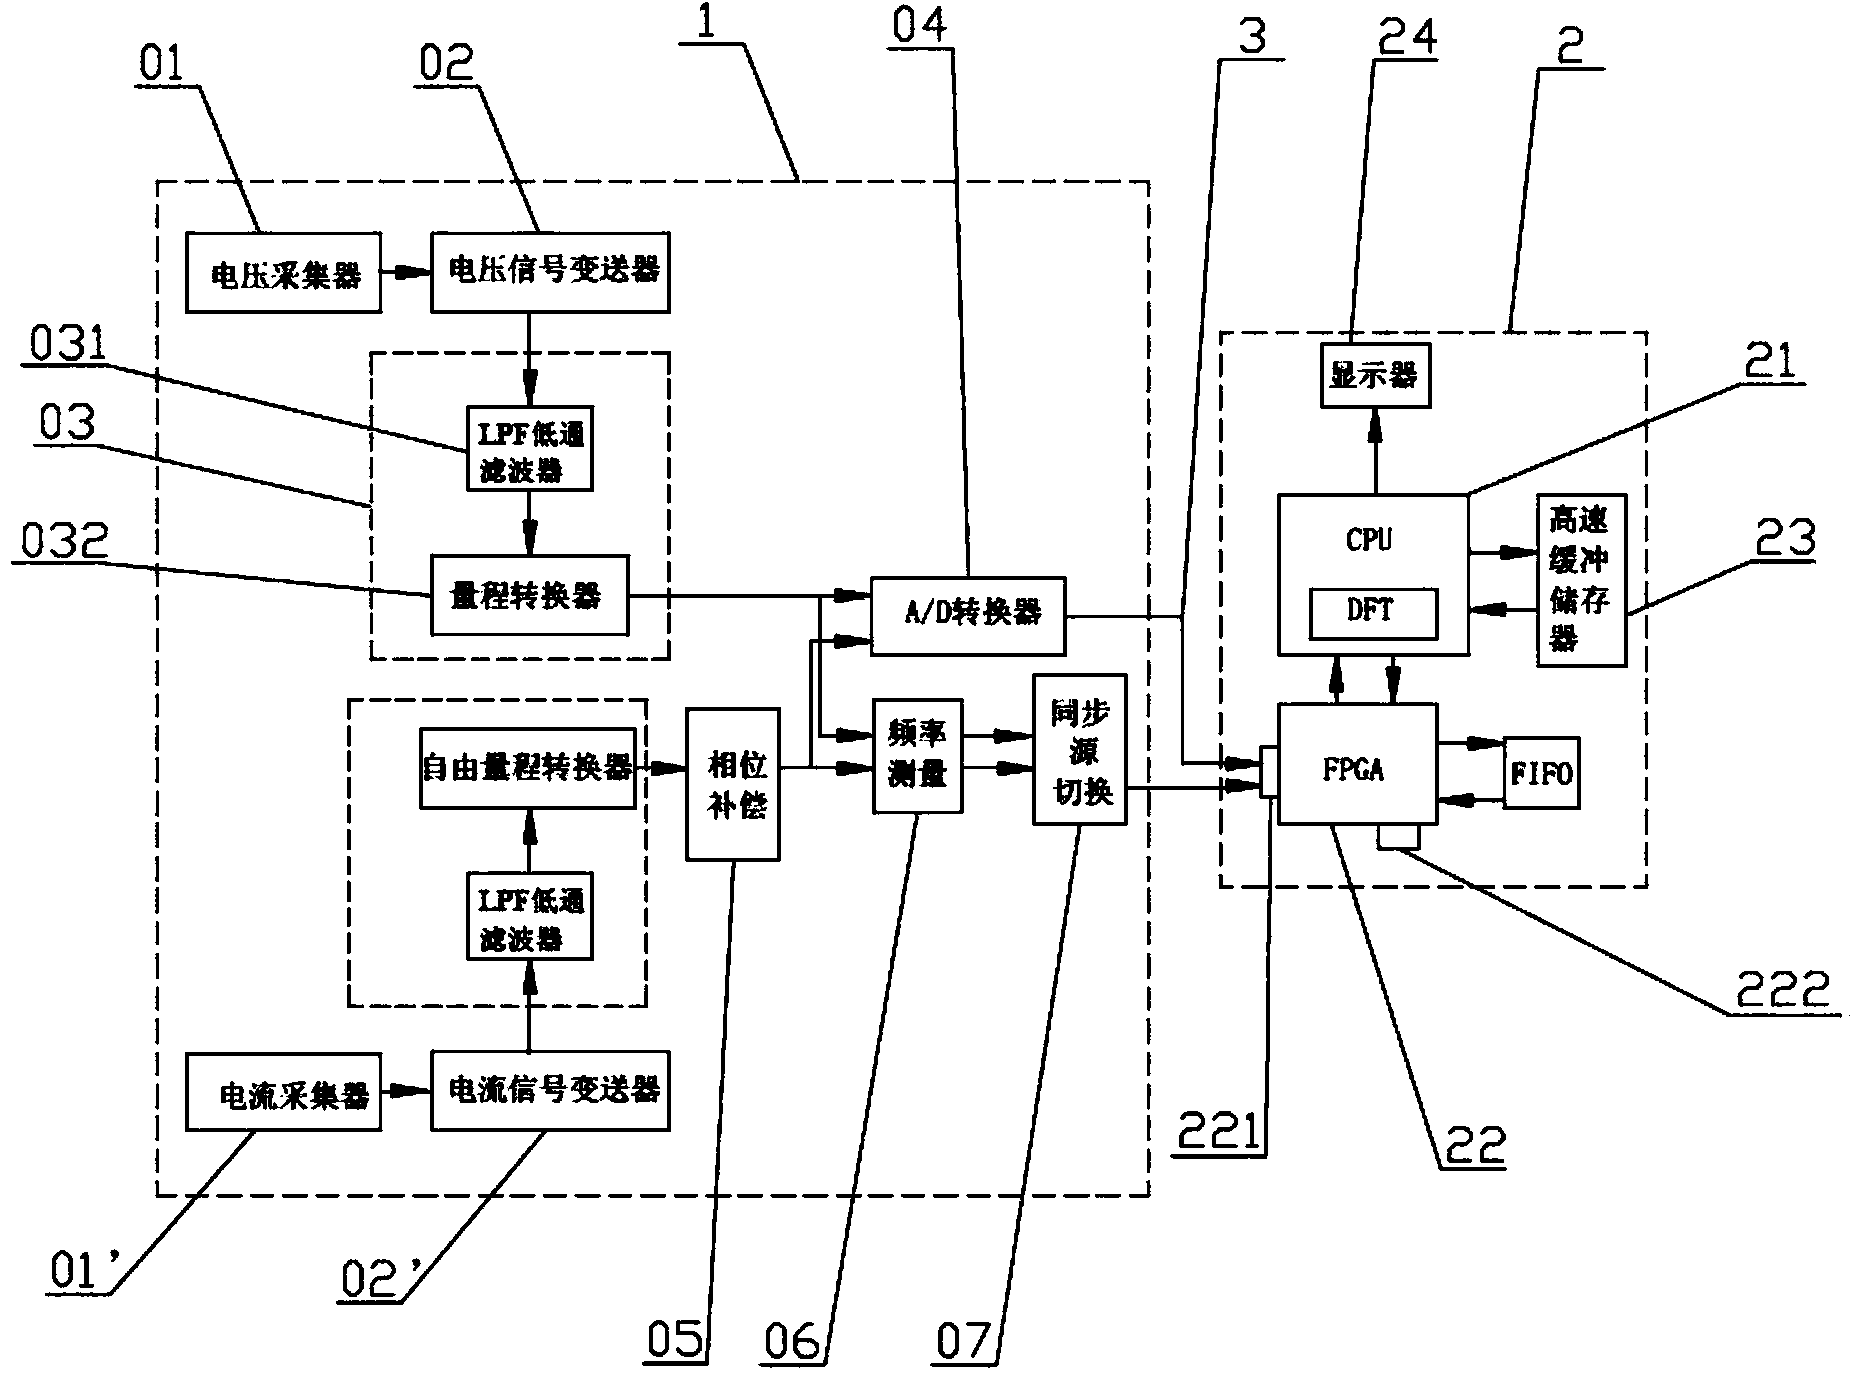 Analytical equipment of frequency conversion electricity based on digital transmission